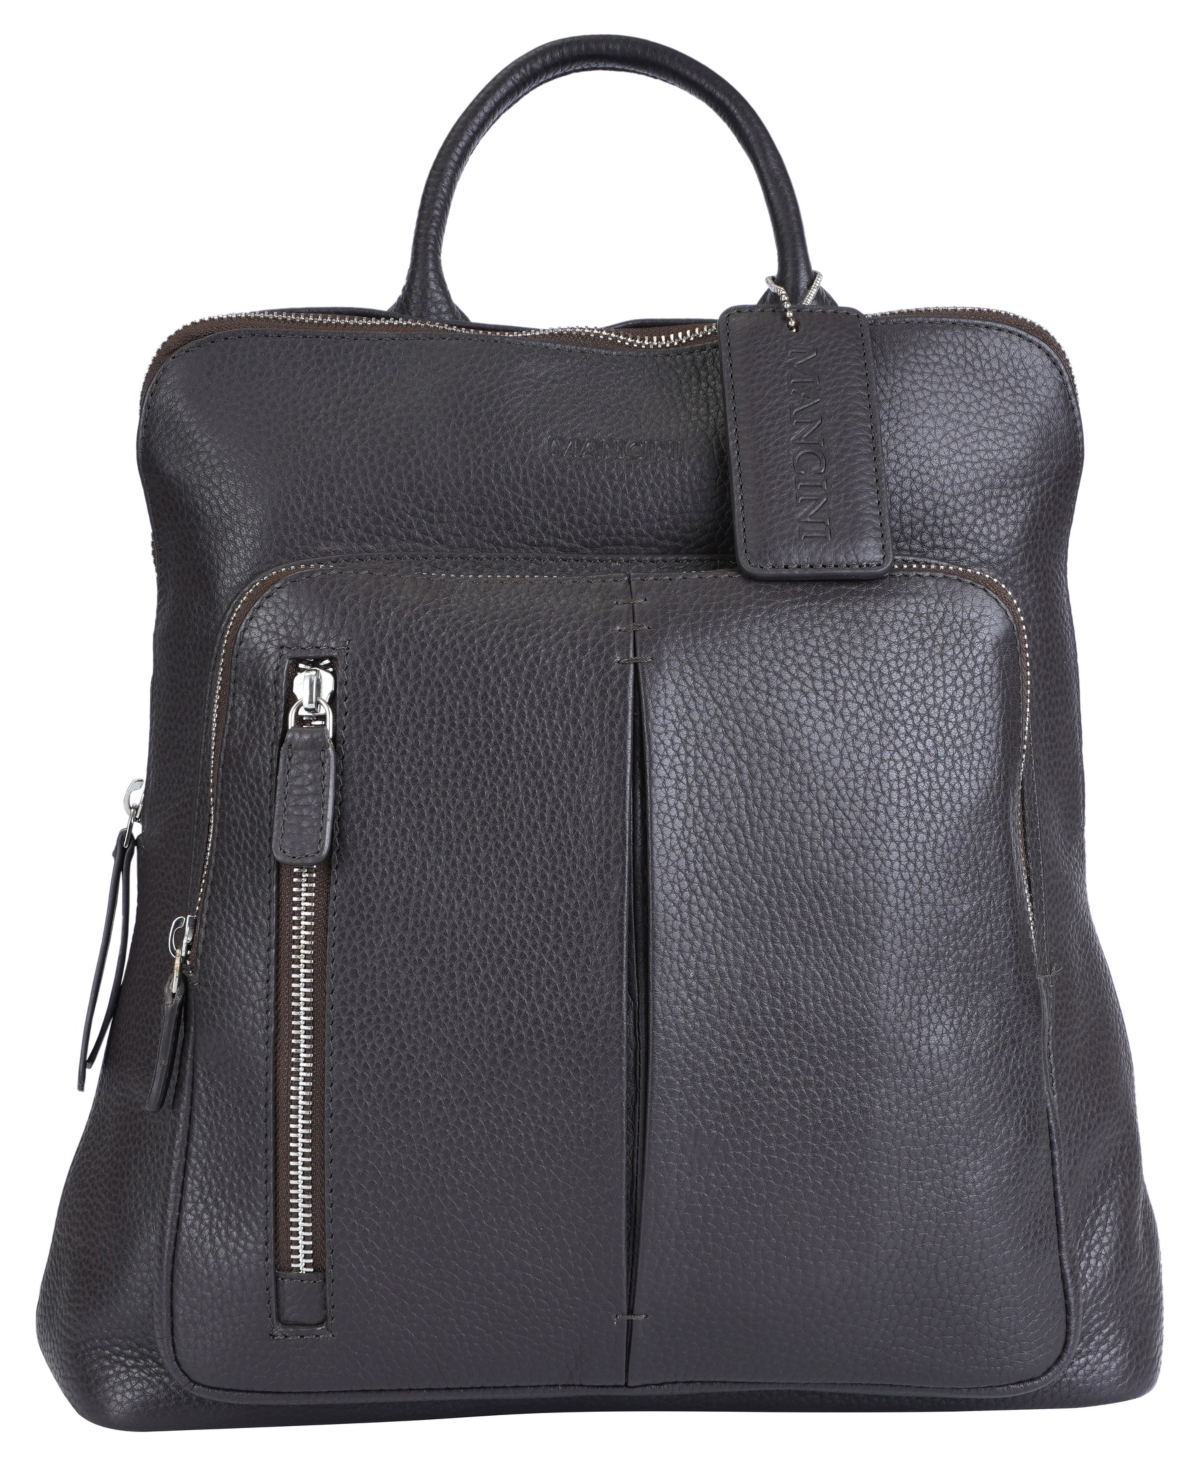 Mancini Pebbled Collection Brigette Leather Backpack In Brown